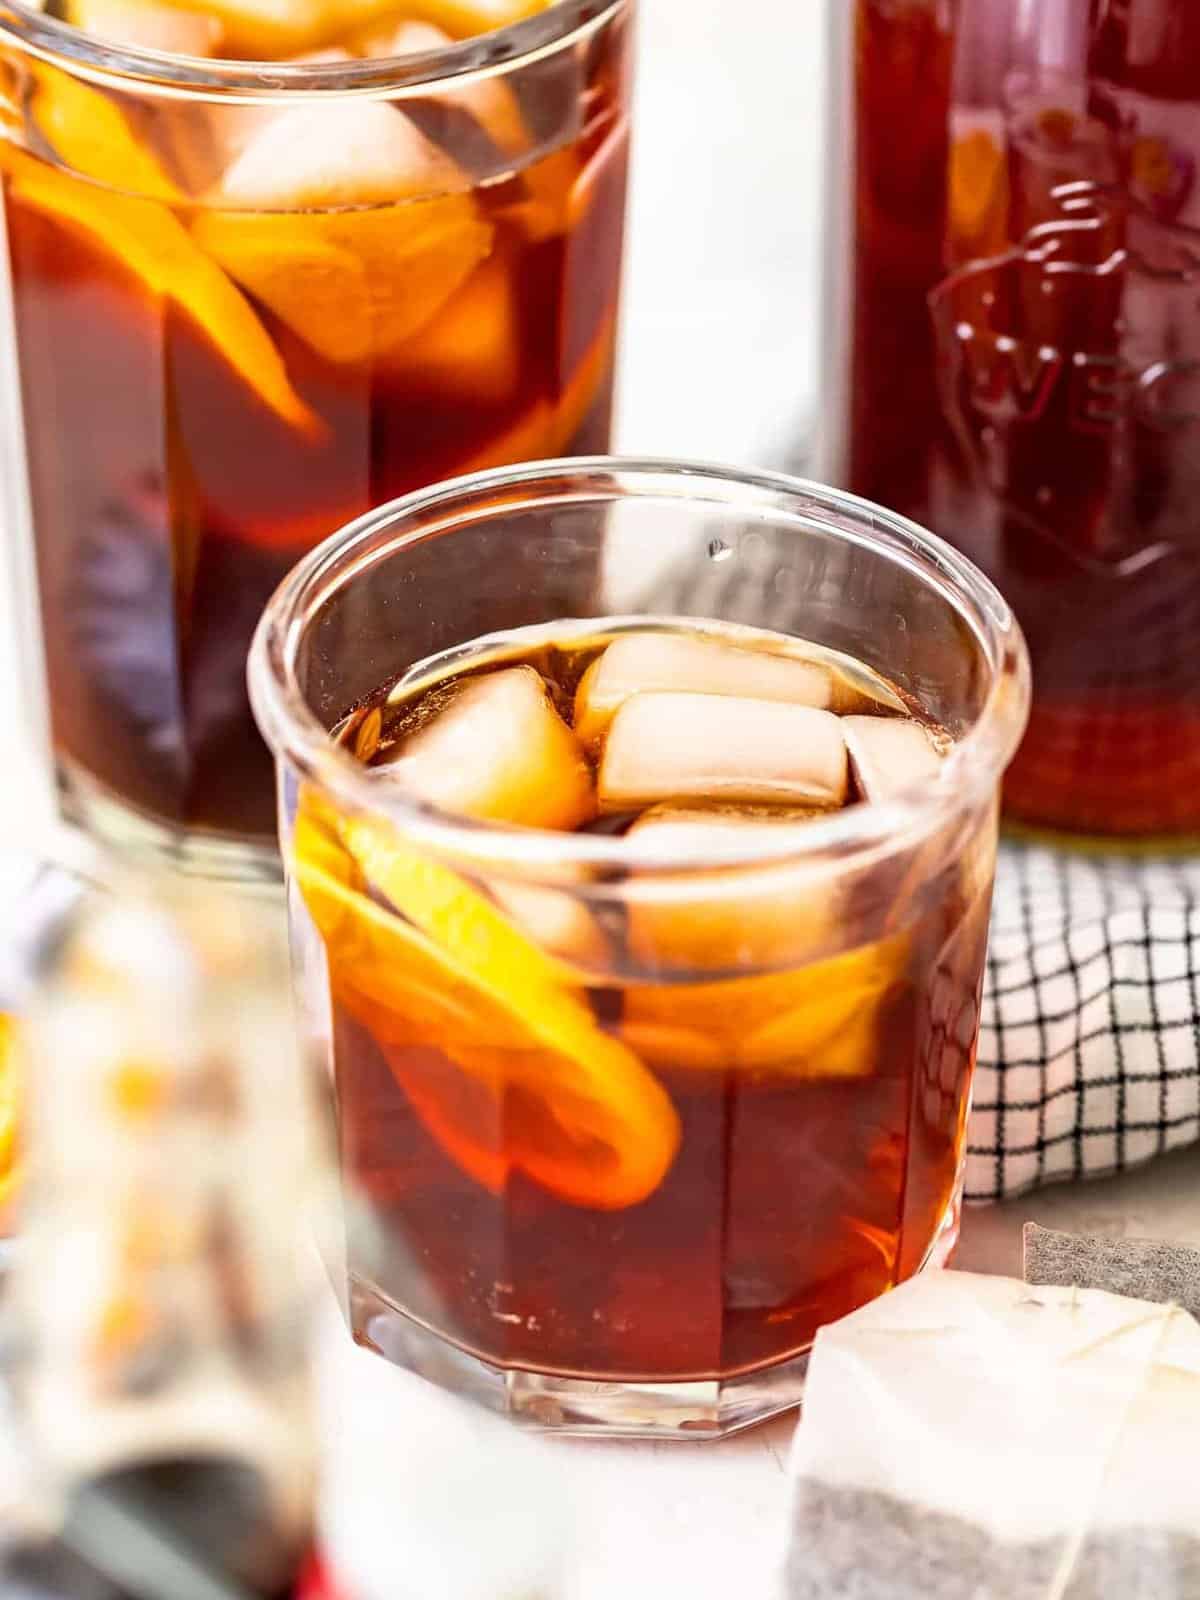 Short and tall glasses of Southern sweet iced tea.